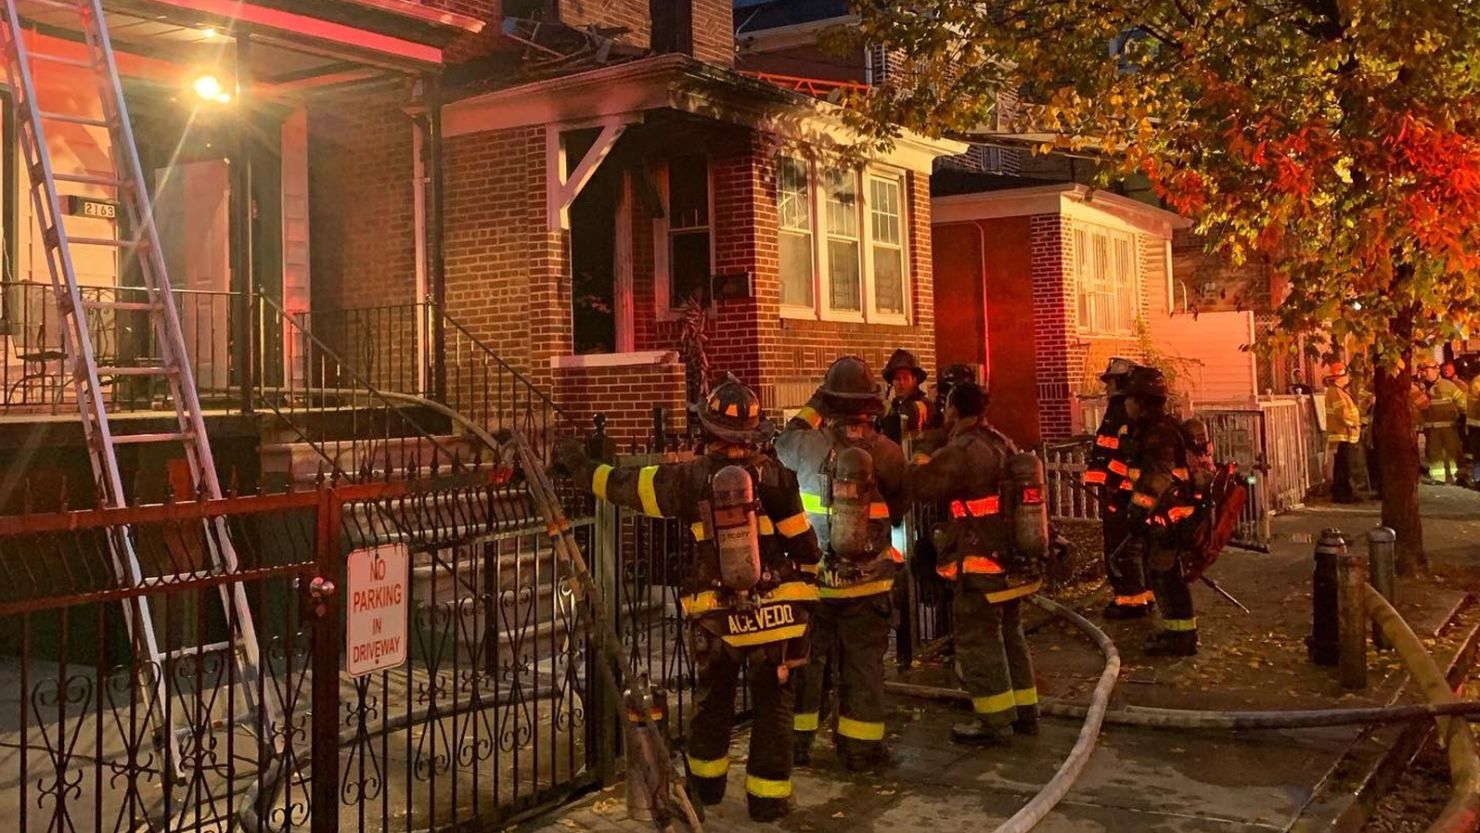 New York Fire Department firefighters at the scene of a house fire in the Bronx that killed four, including a 10-month-old infant, early Sunday morning. 